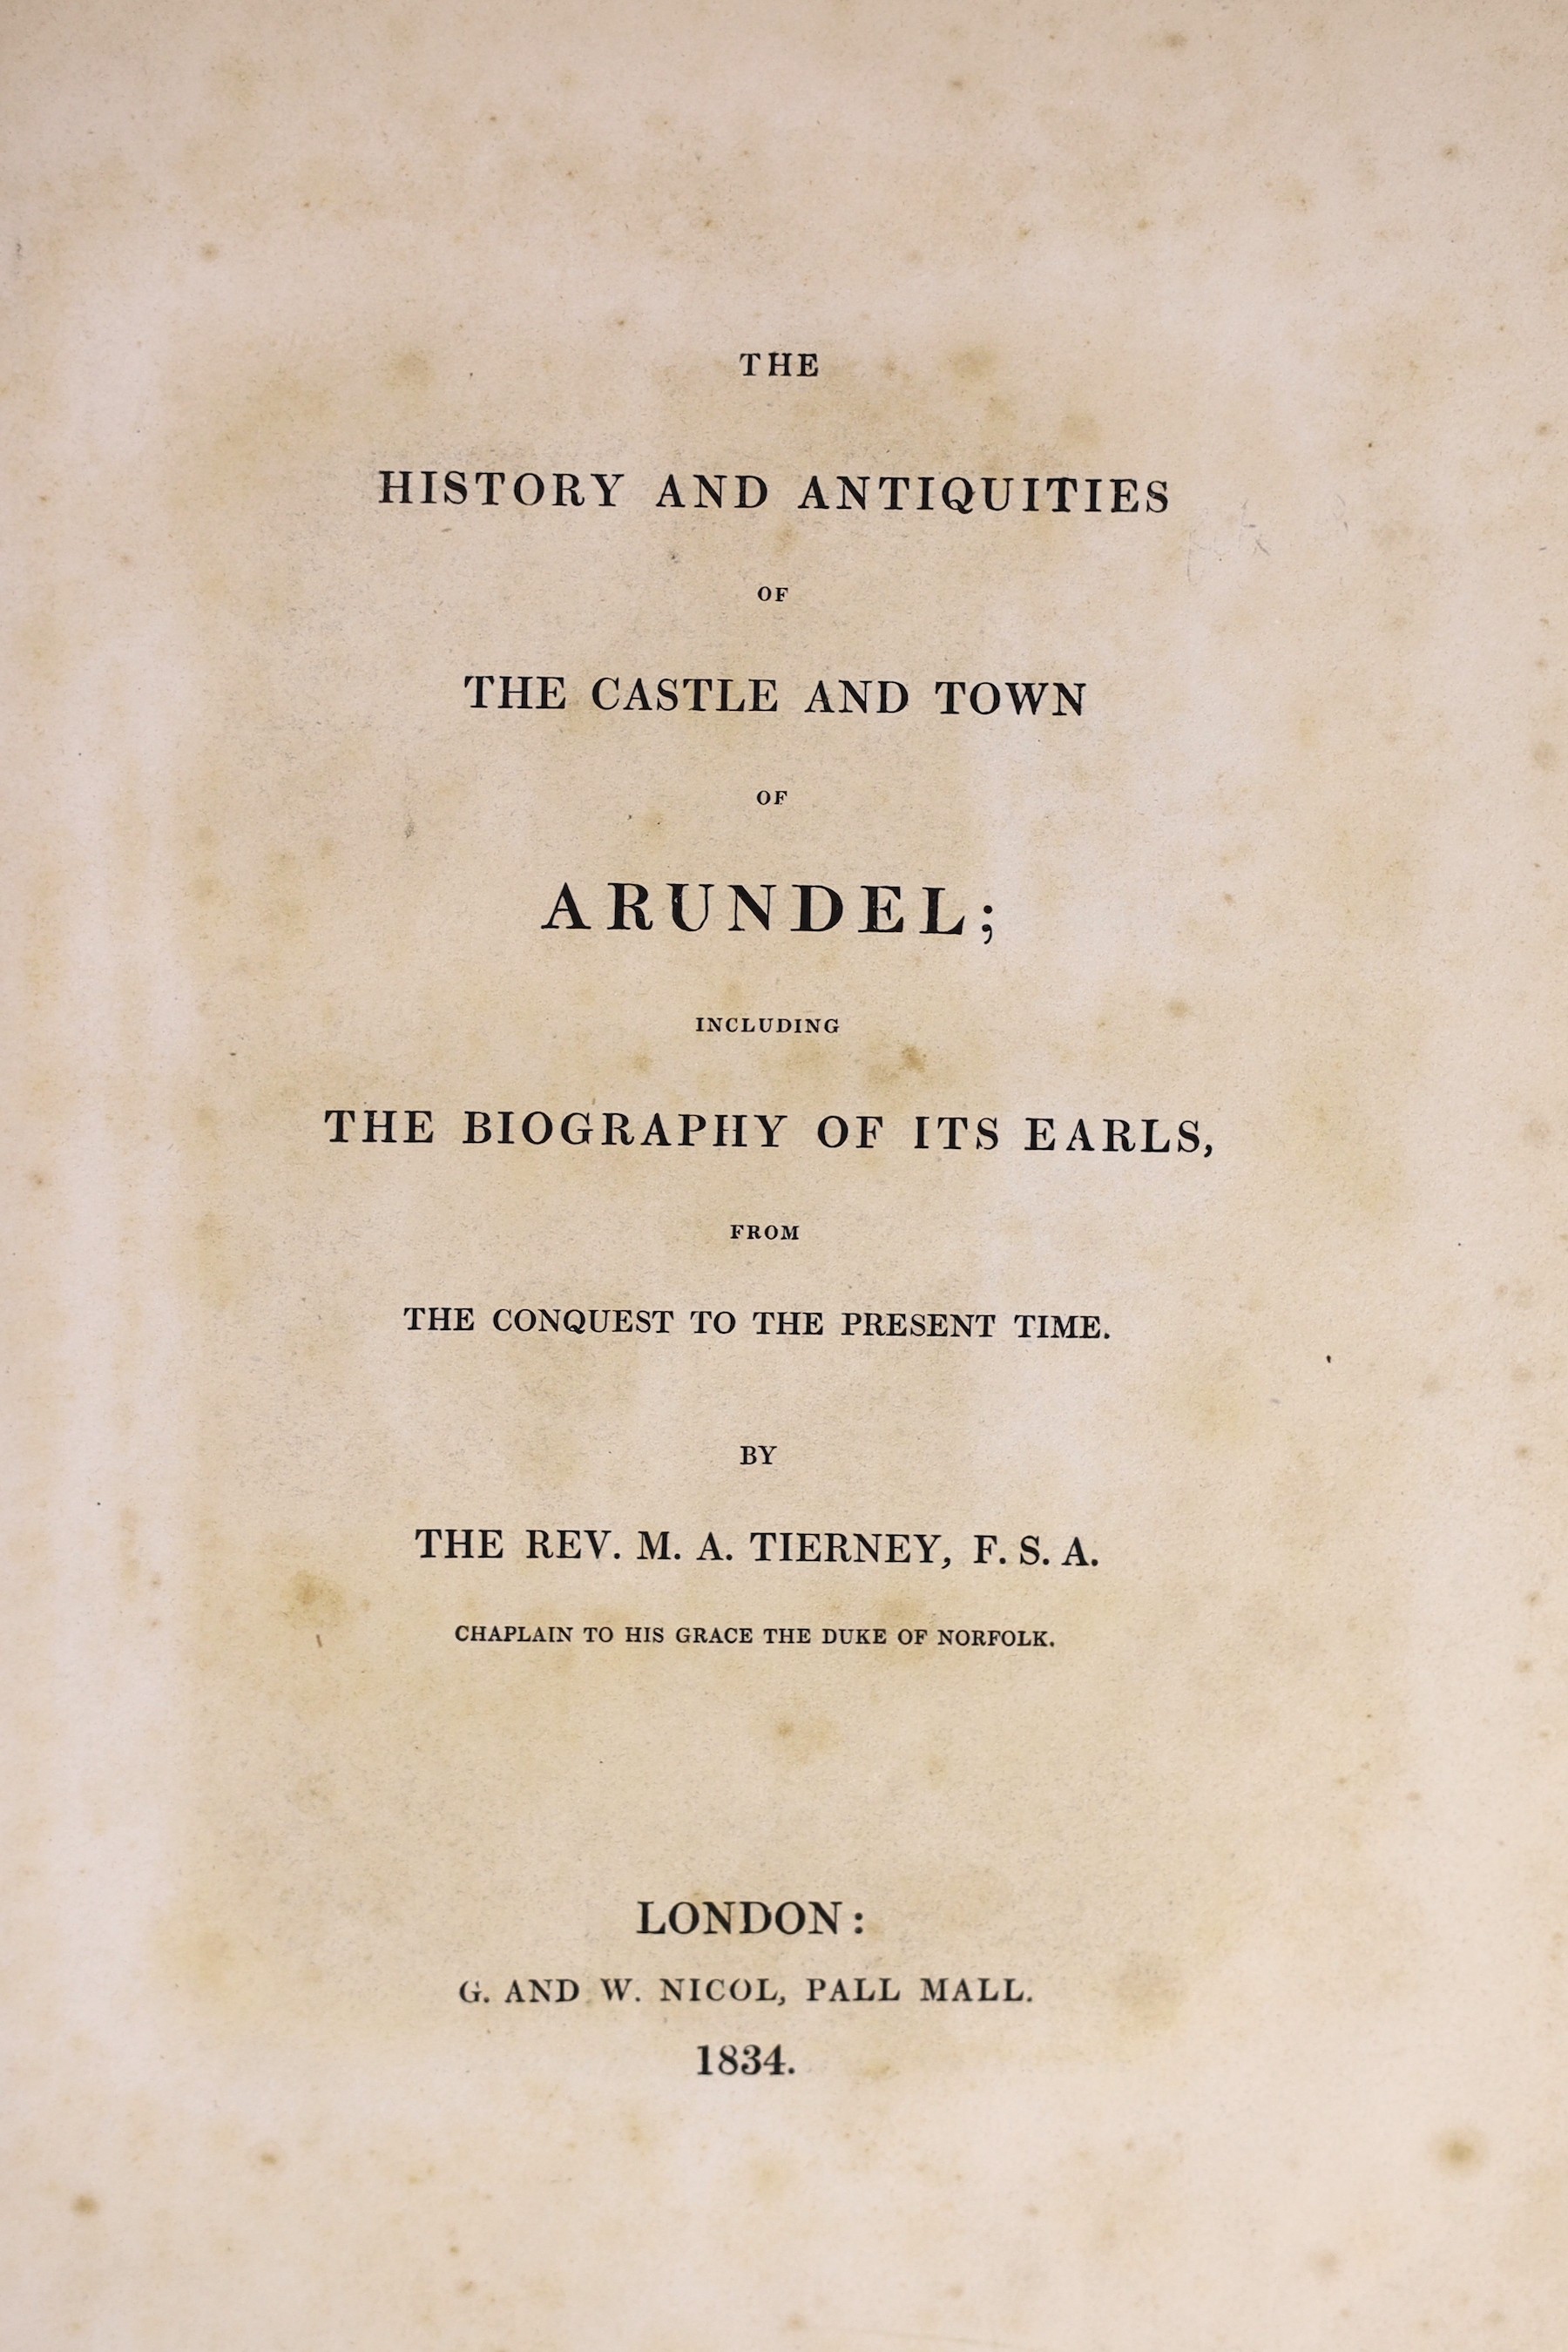 ARUNDEL - Tierney, M.A. Rev. - The History and Antiquities of the Castle and Town of Arundel, 4to, cloth, with frontis and 6 plates, one folding and tables of genealogies, G. and W. Nichol, London, 1834